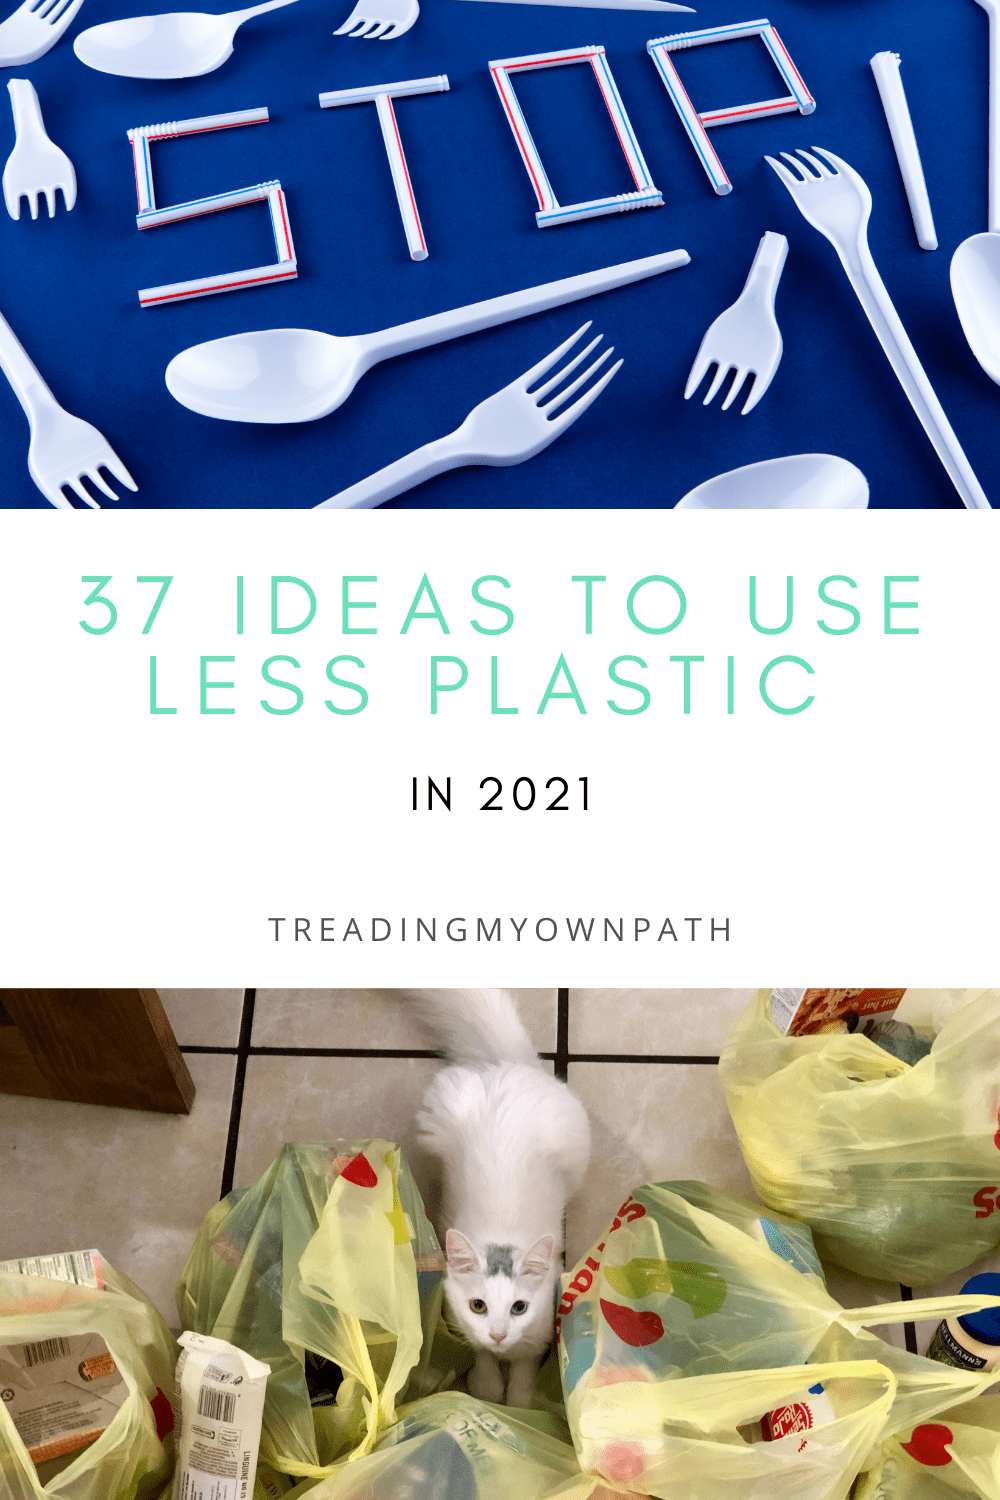 37 ways to use less plastic in 2022